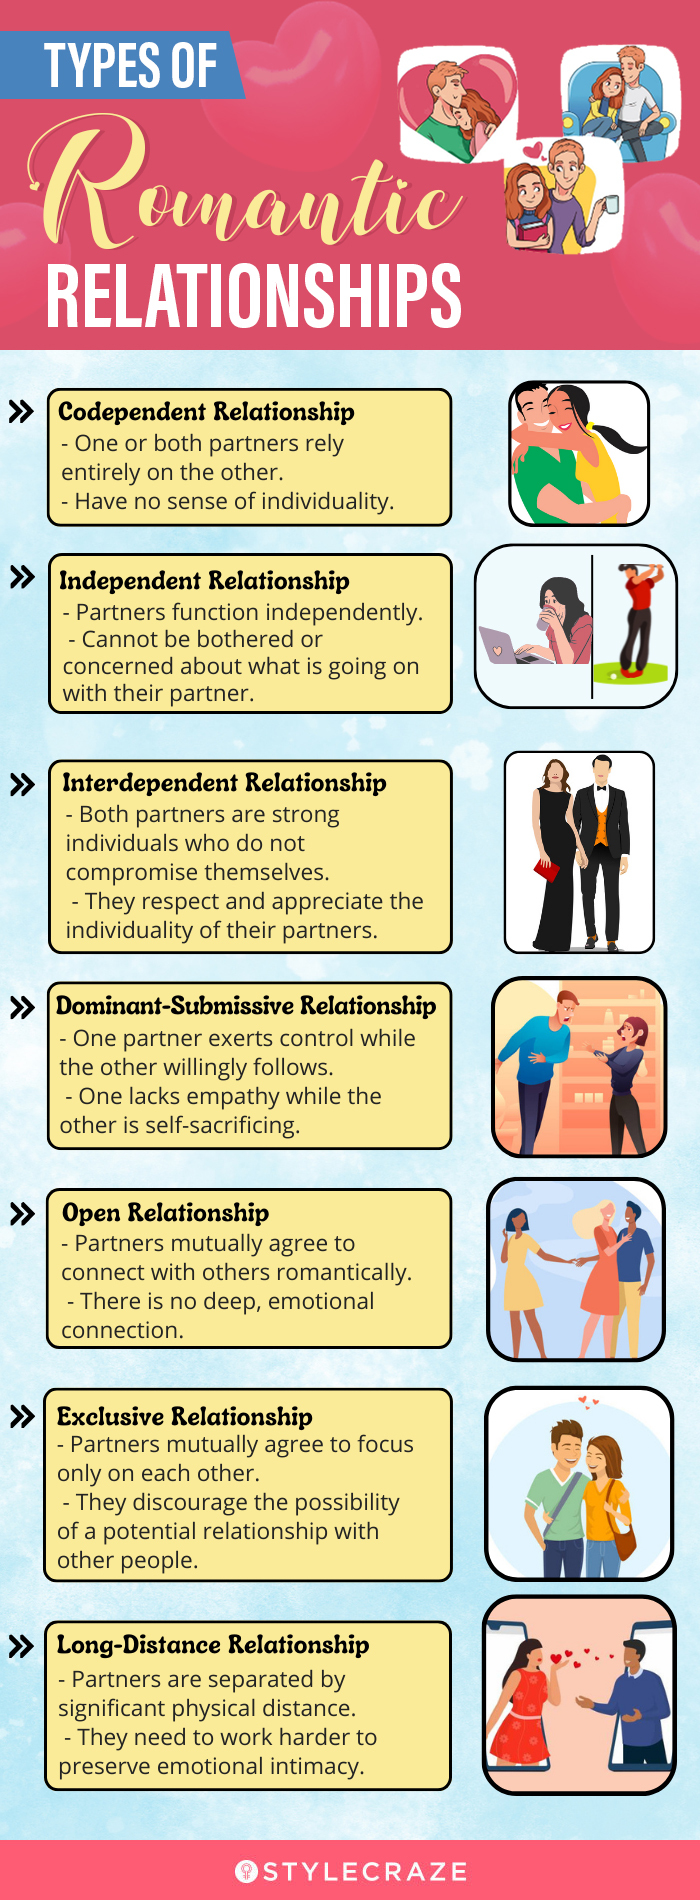 types of romantic relationships (infographic)